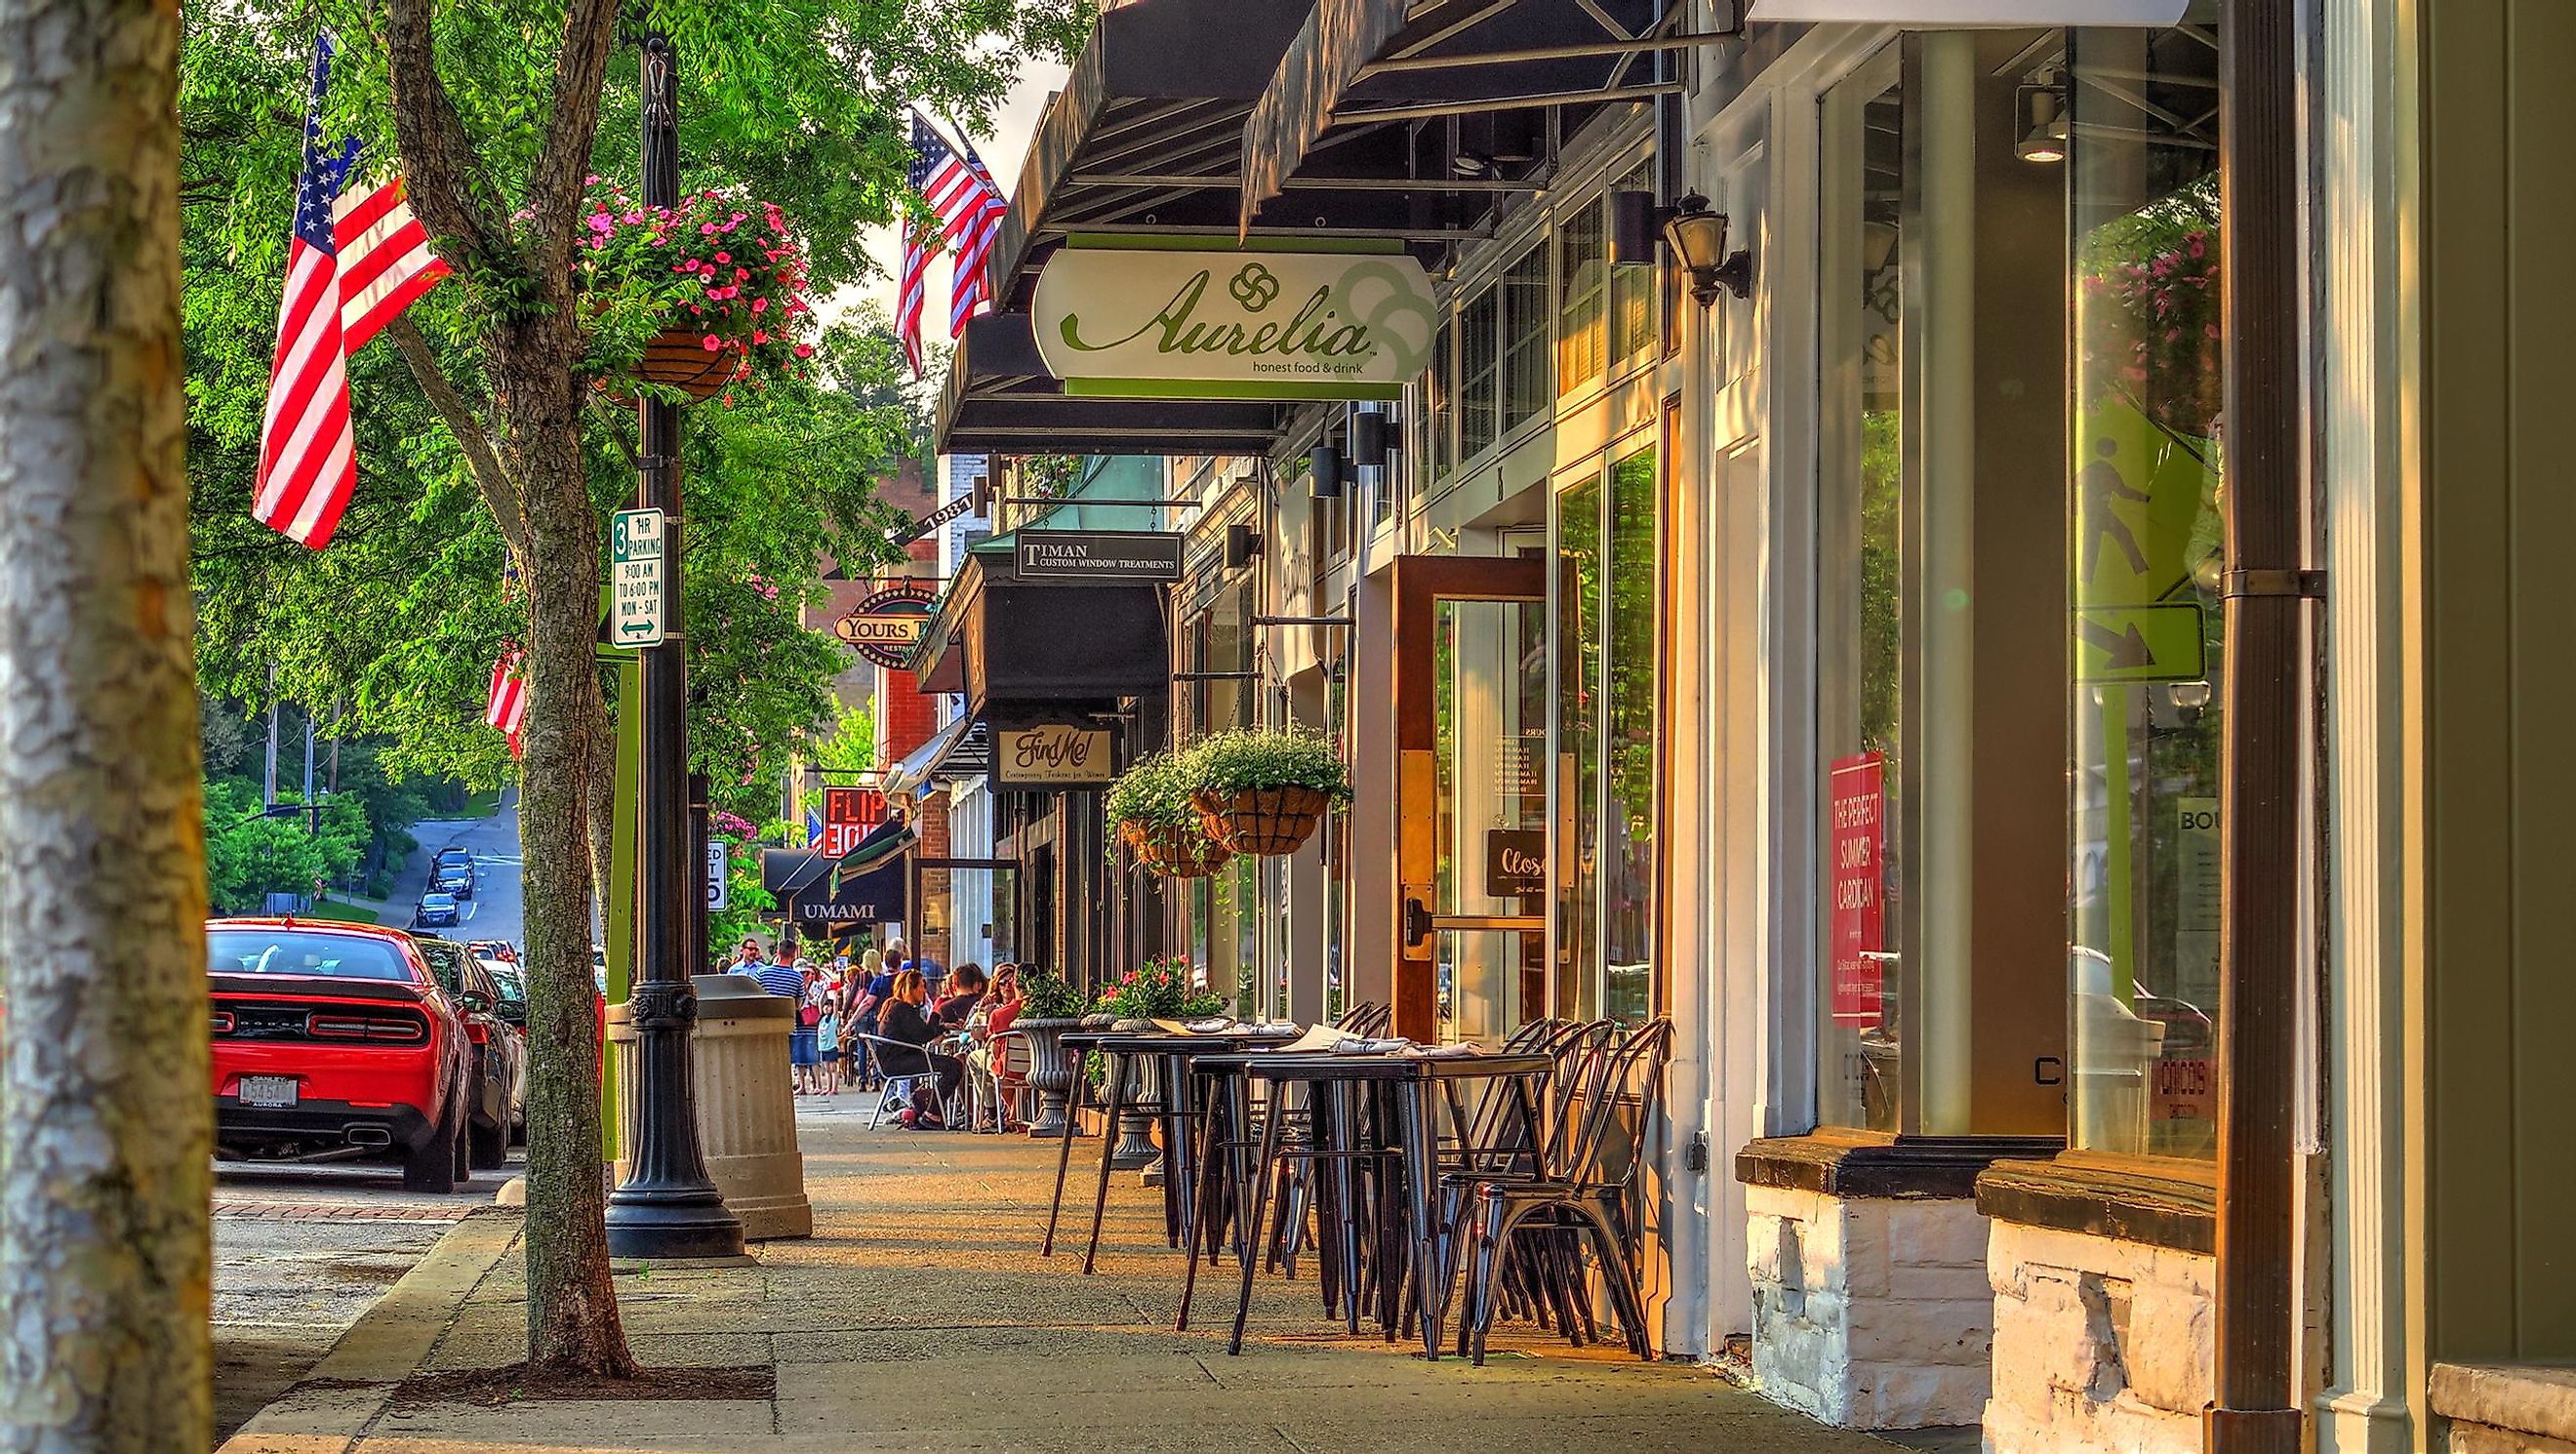 Summer Late Afternoon Warm Sunny Scene of Sidewalk and Shops on Main Street in the Business District of Historical Downtown Chagrin Falls, Ohio